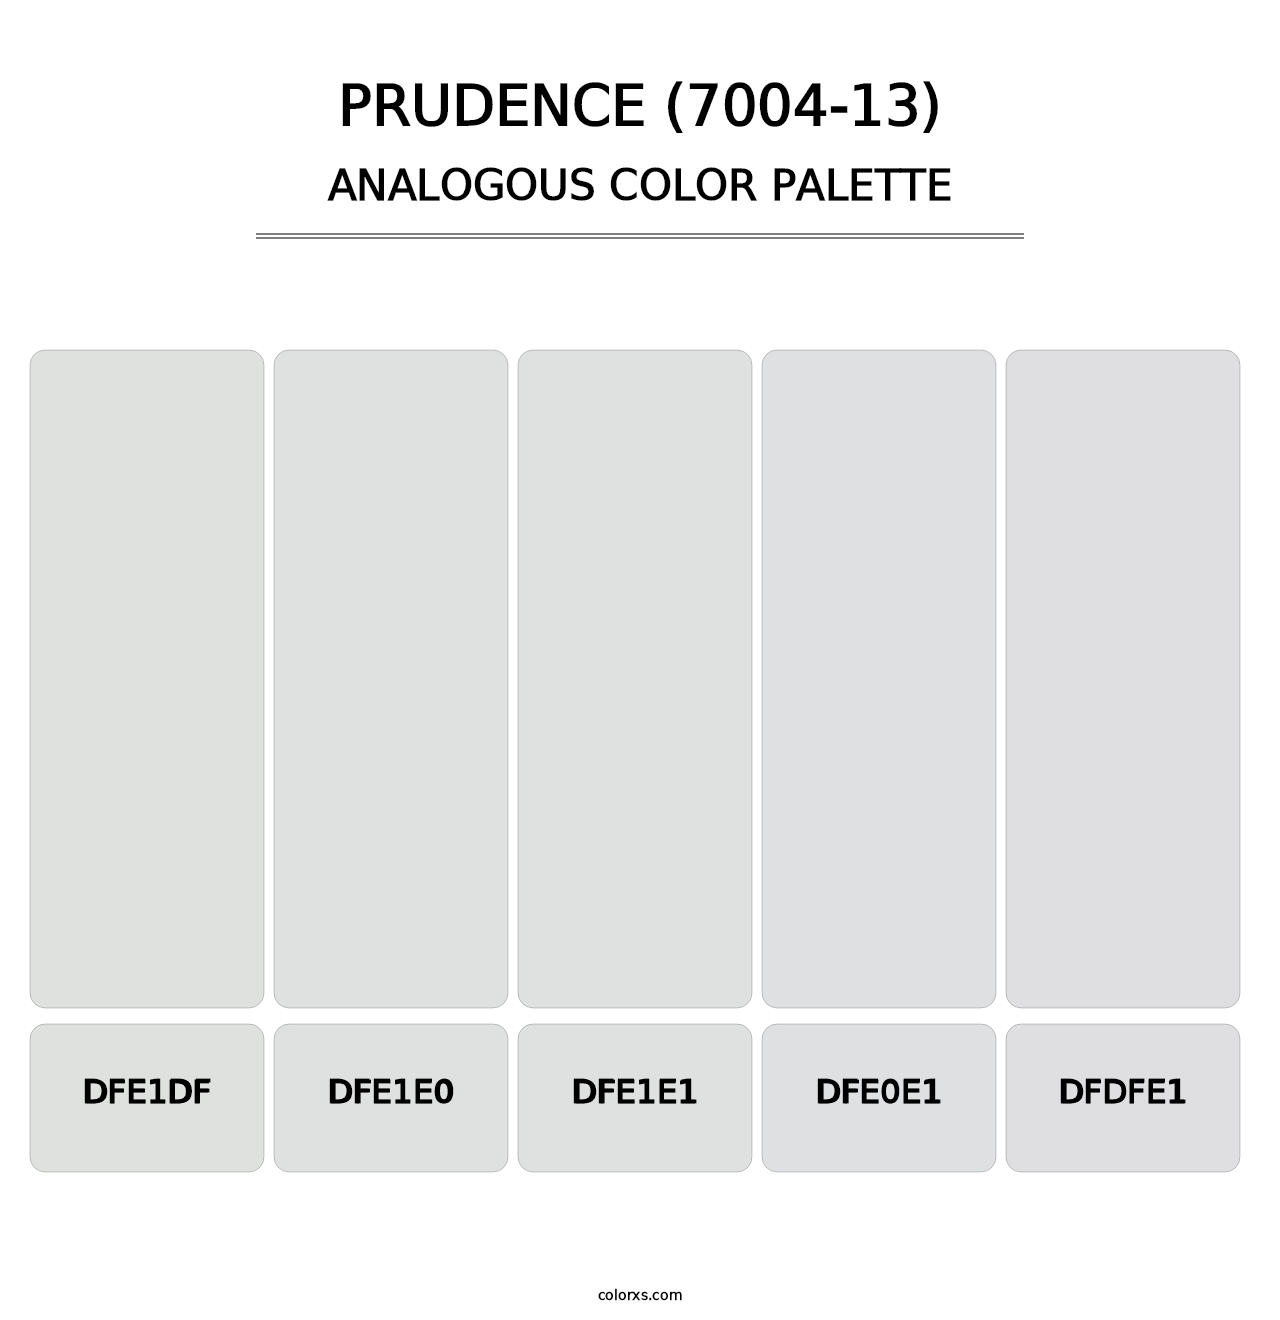 Prudence (7004-13) - Analogous Color Palette